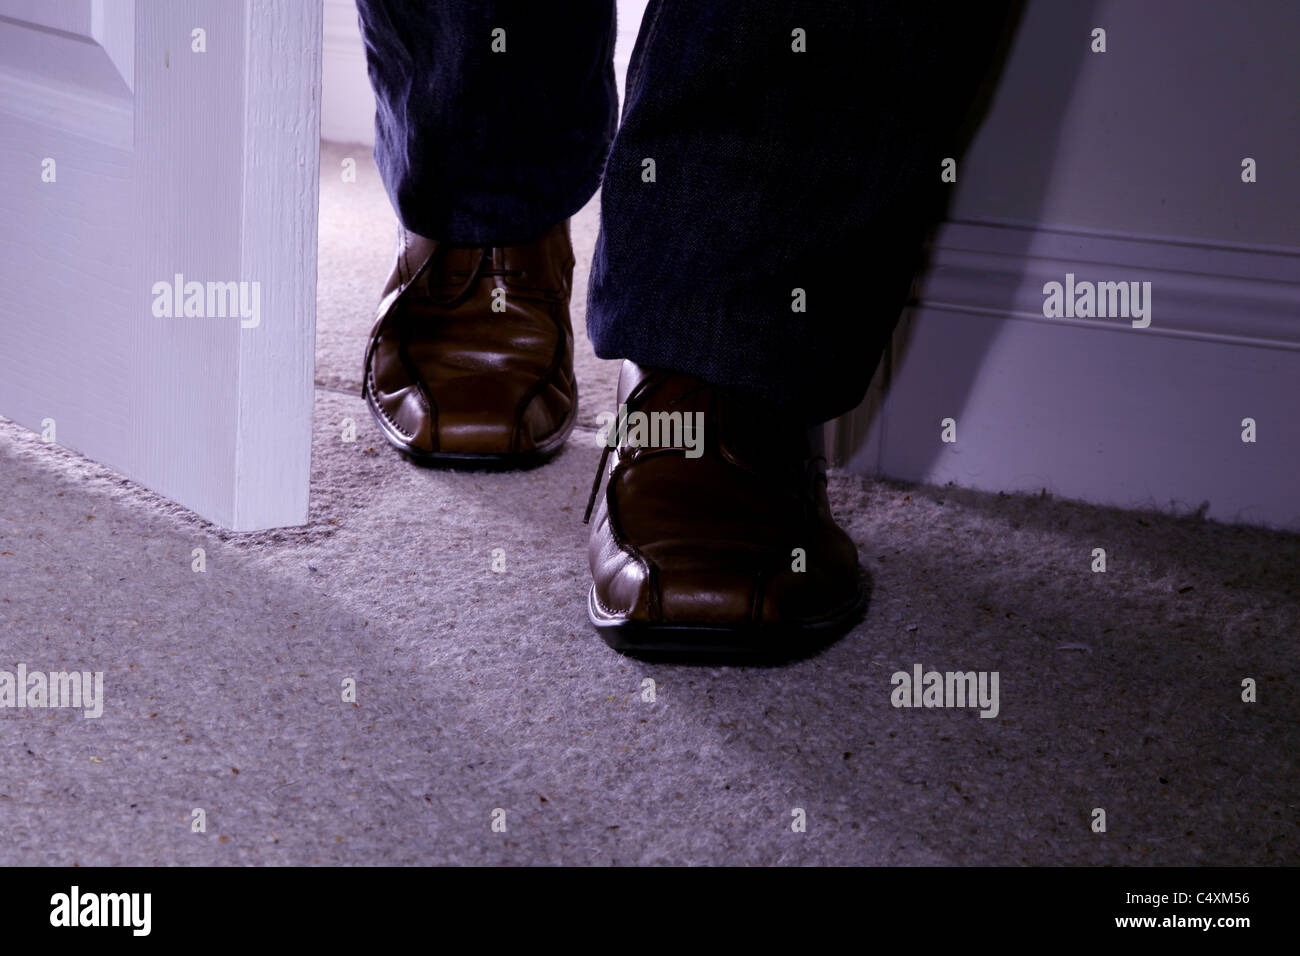 Man's feet only wearing brown shoes entering a dark carpeted room Stock Photo